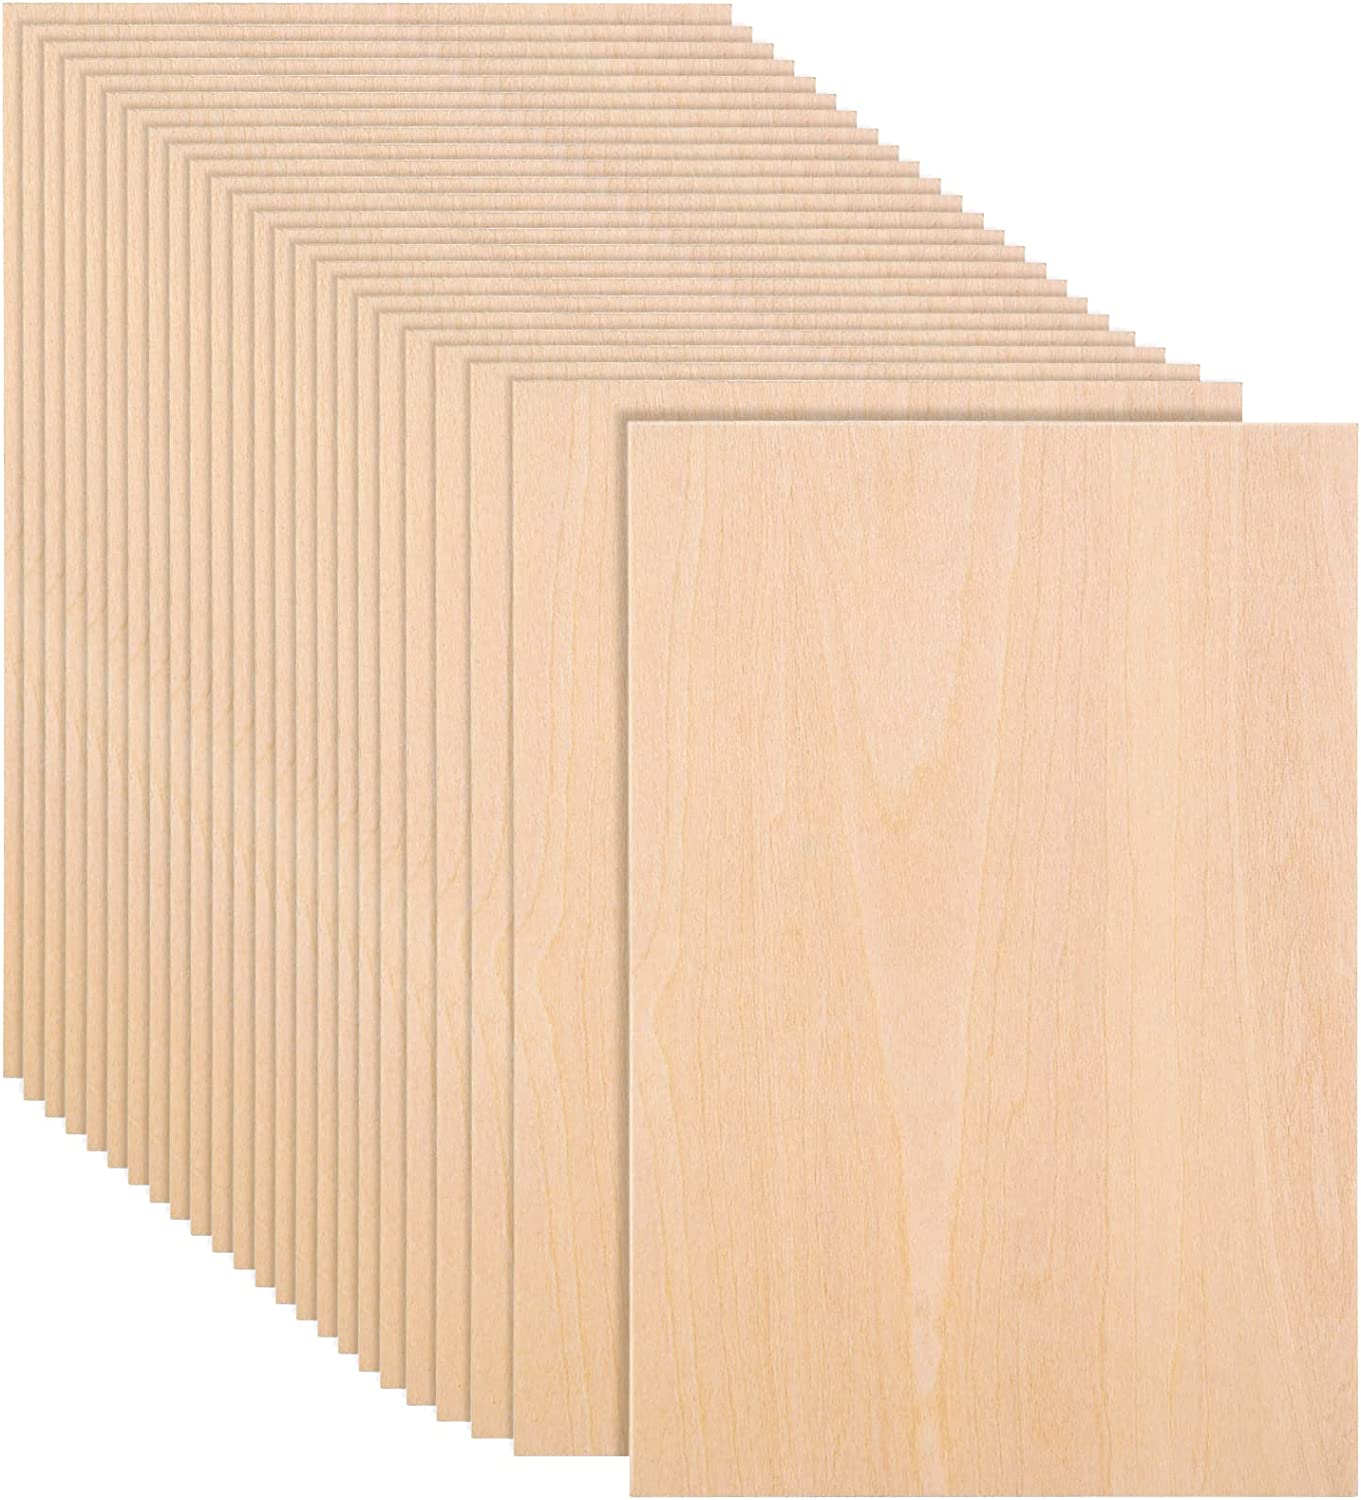 20 Pack 3mm Basswood Sheets Plywood Unfinished Wood (12 x 12 Inch) for  Crafts